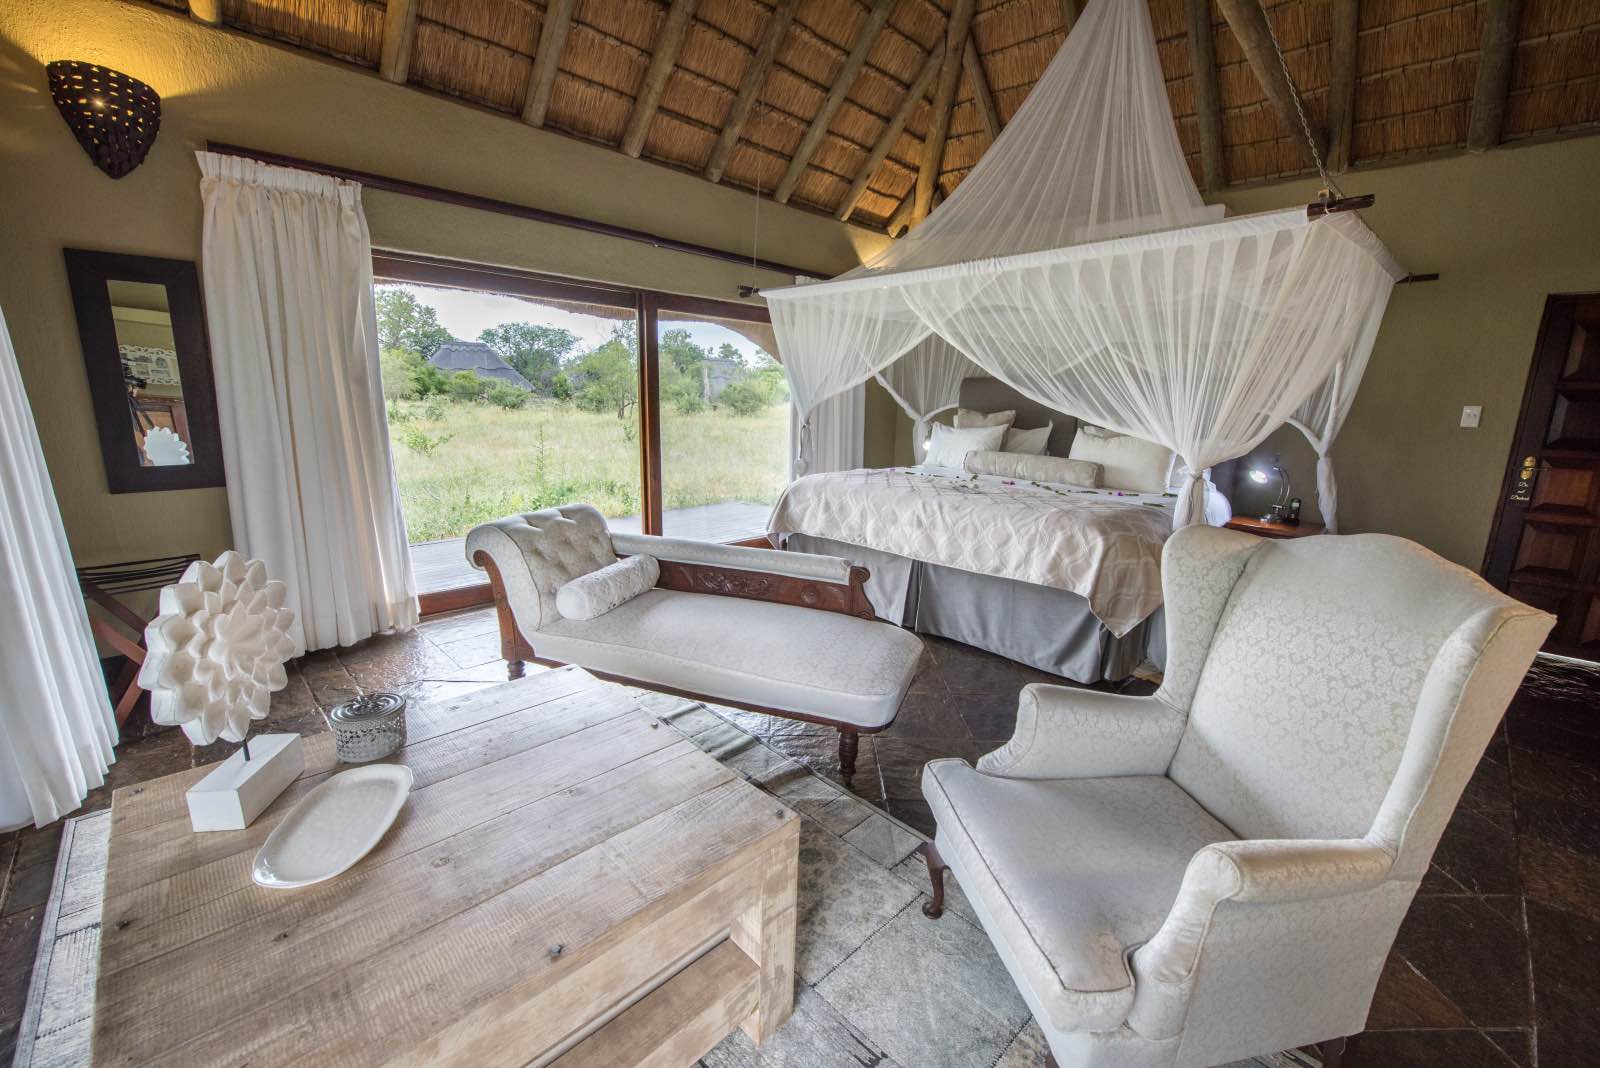 Kambaku River Sands guest bedroom with high thatch ceilings and wide glass windows